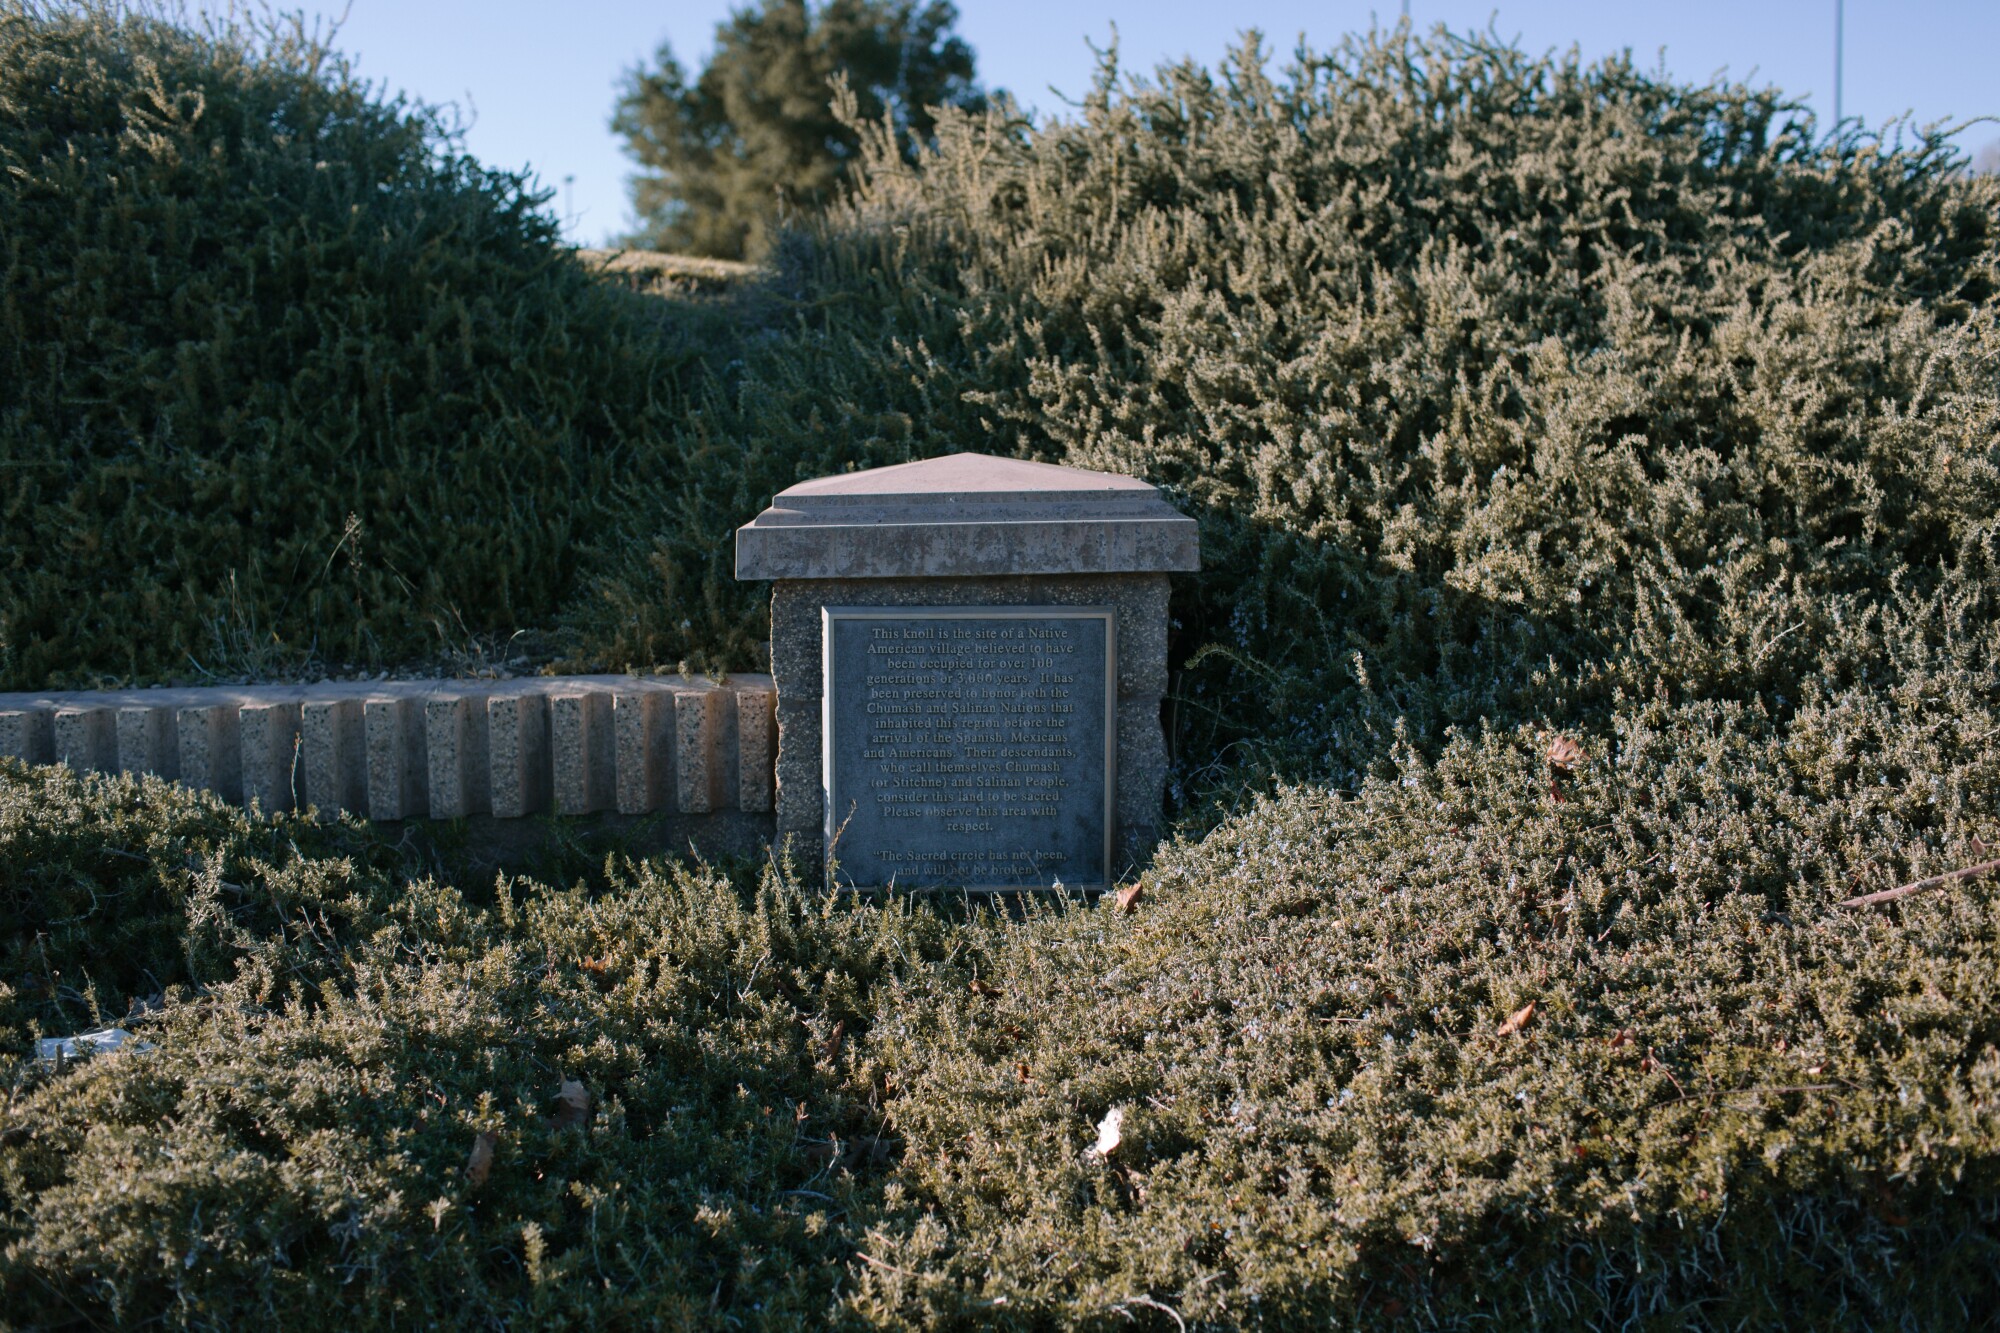 A stone monument with a plaque, surrounded by green shrubbery